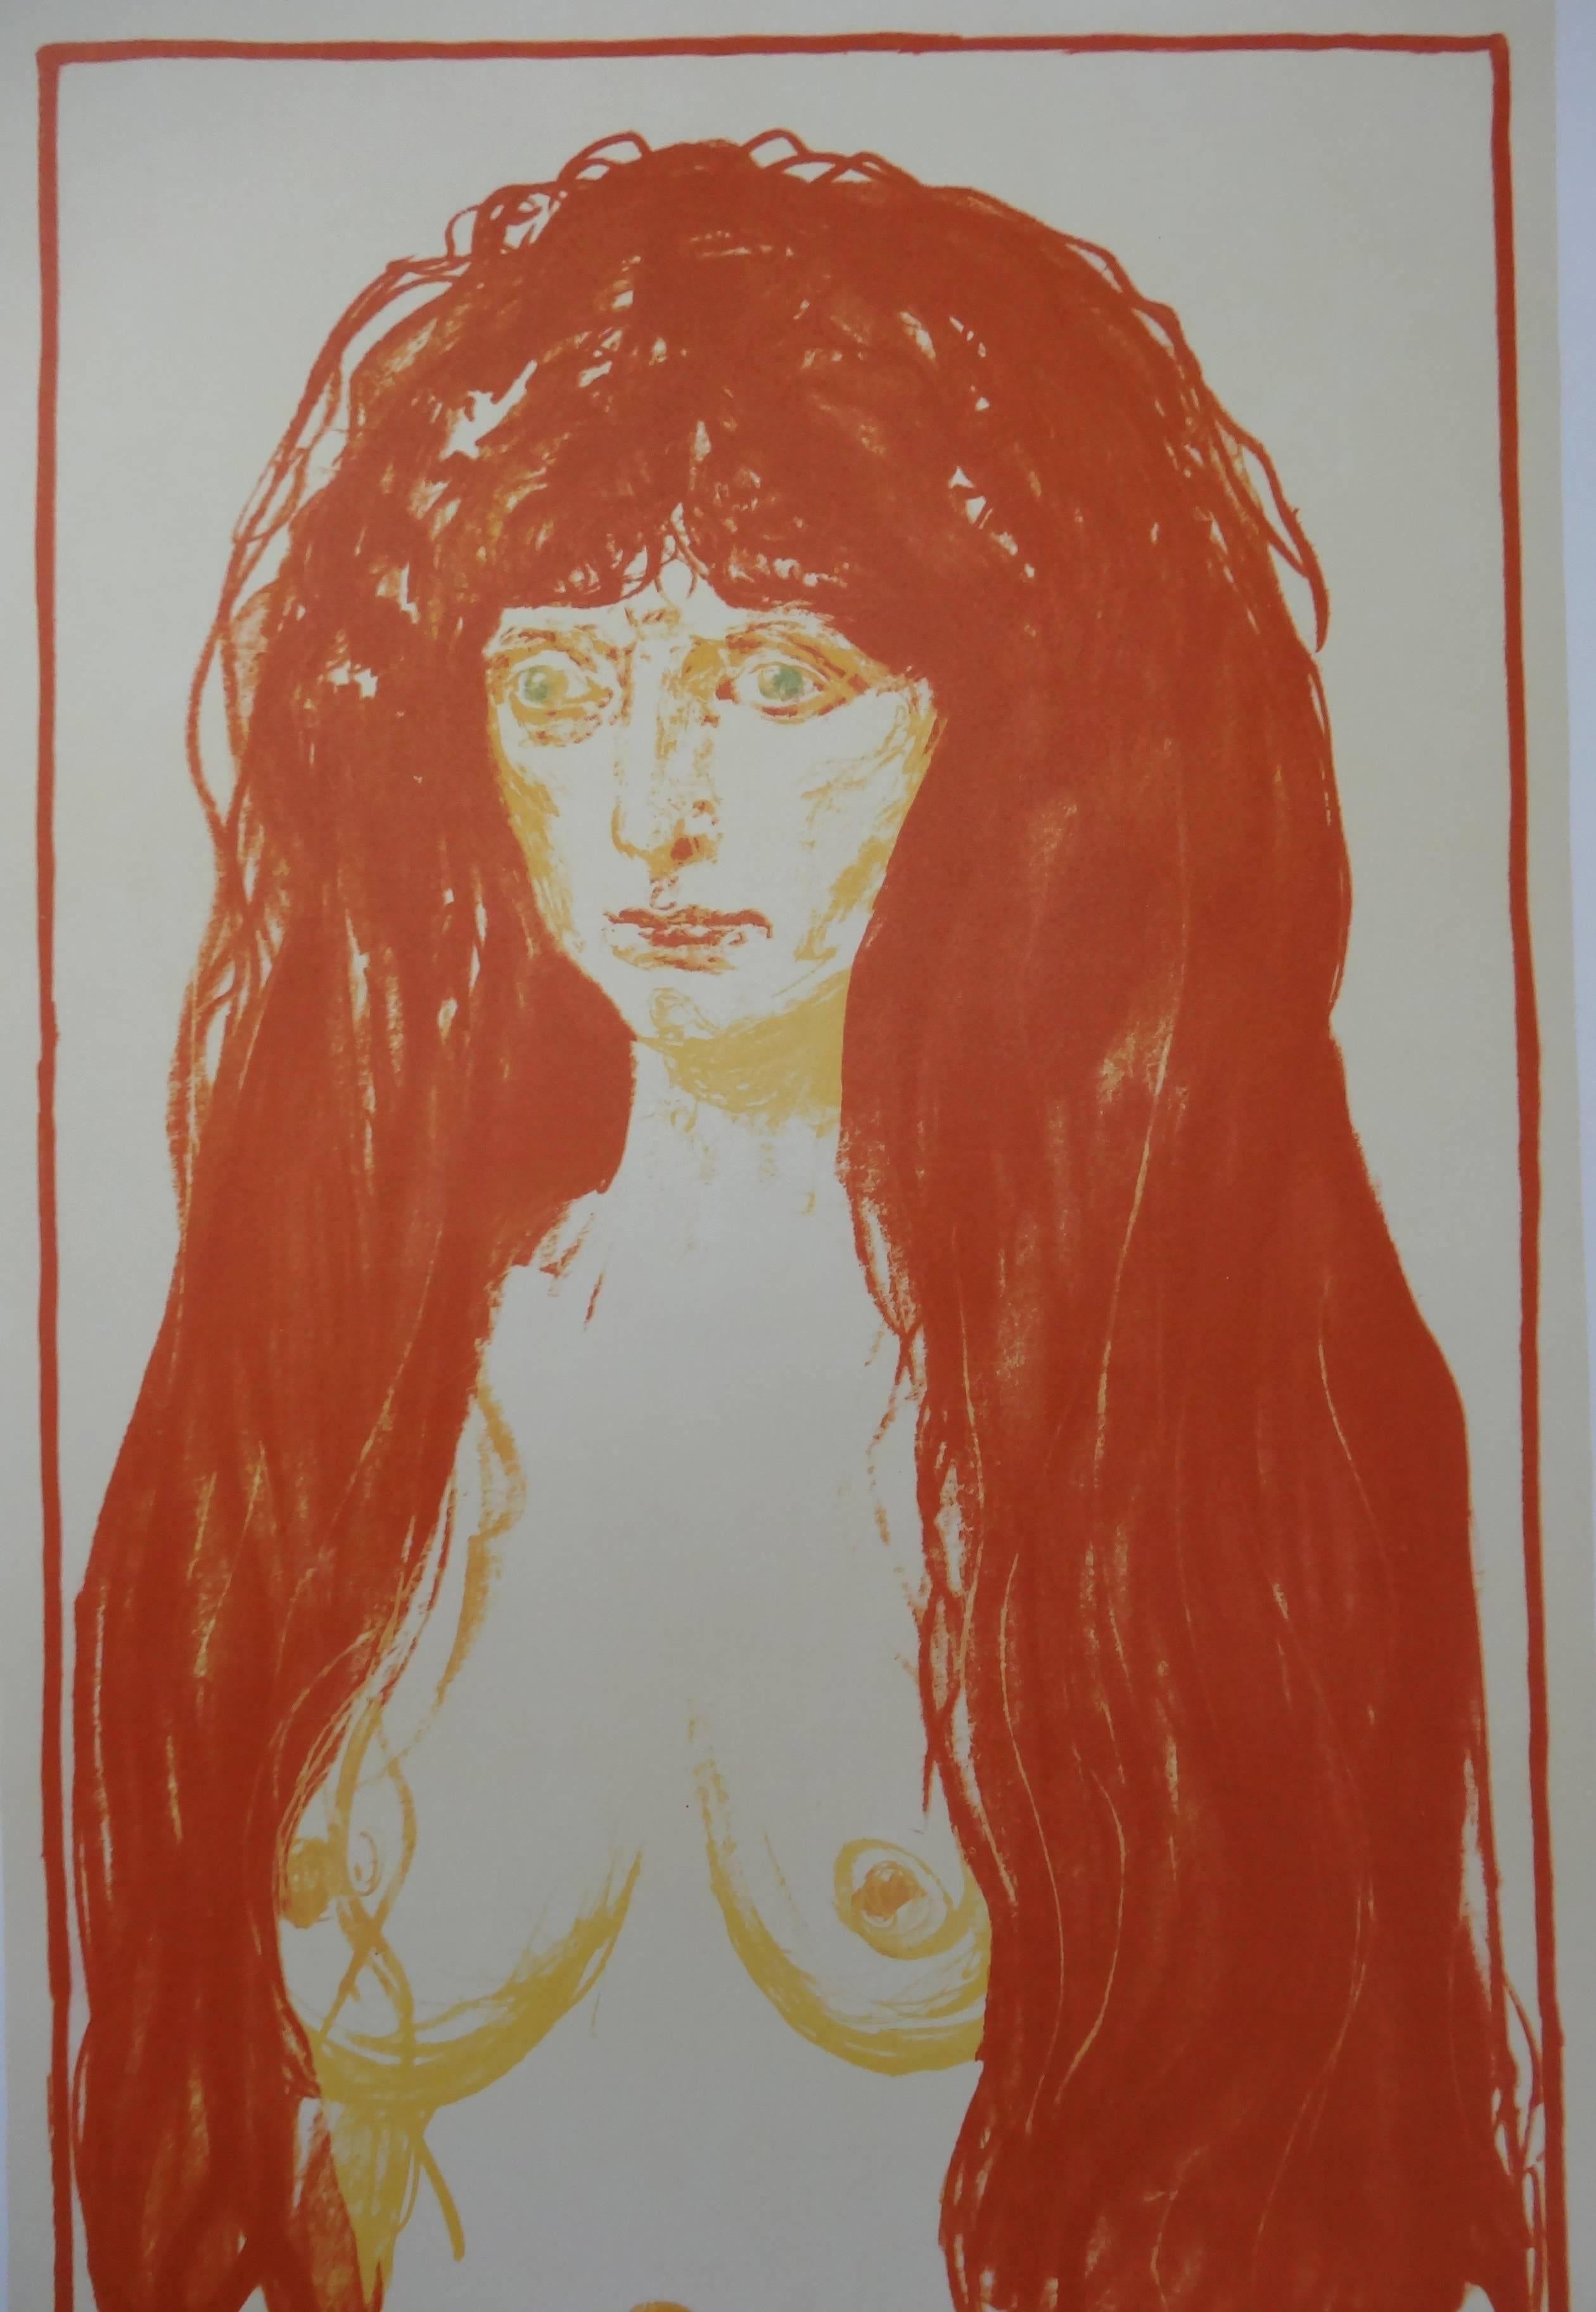 Redhead Woman - Lithograph Exhibition Poster #Los Angeles County Museum #MOURLOT - Print by Edvard Munch